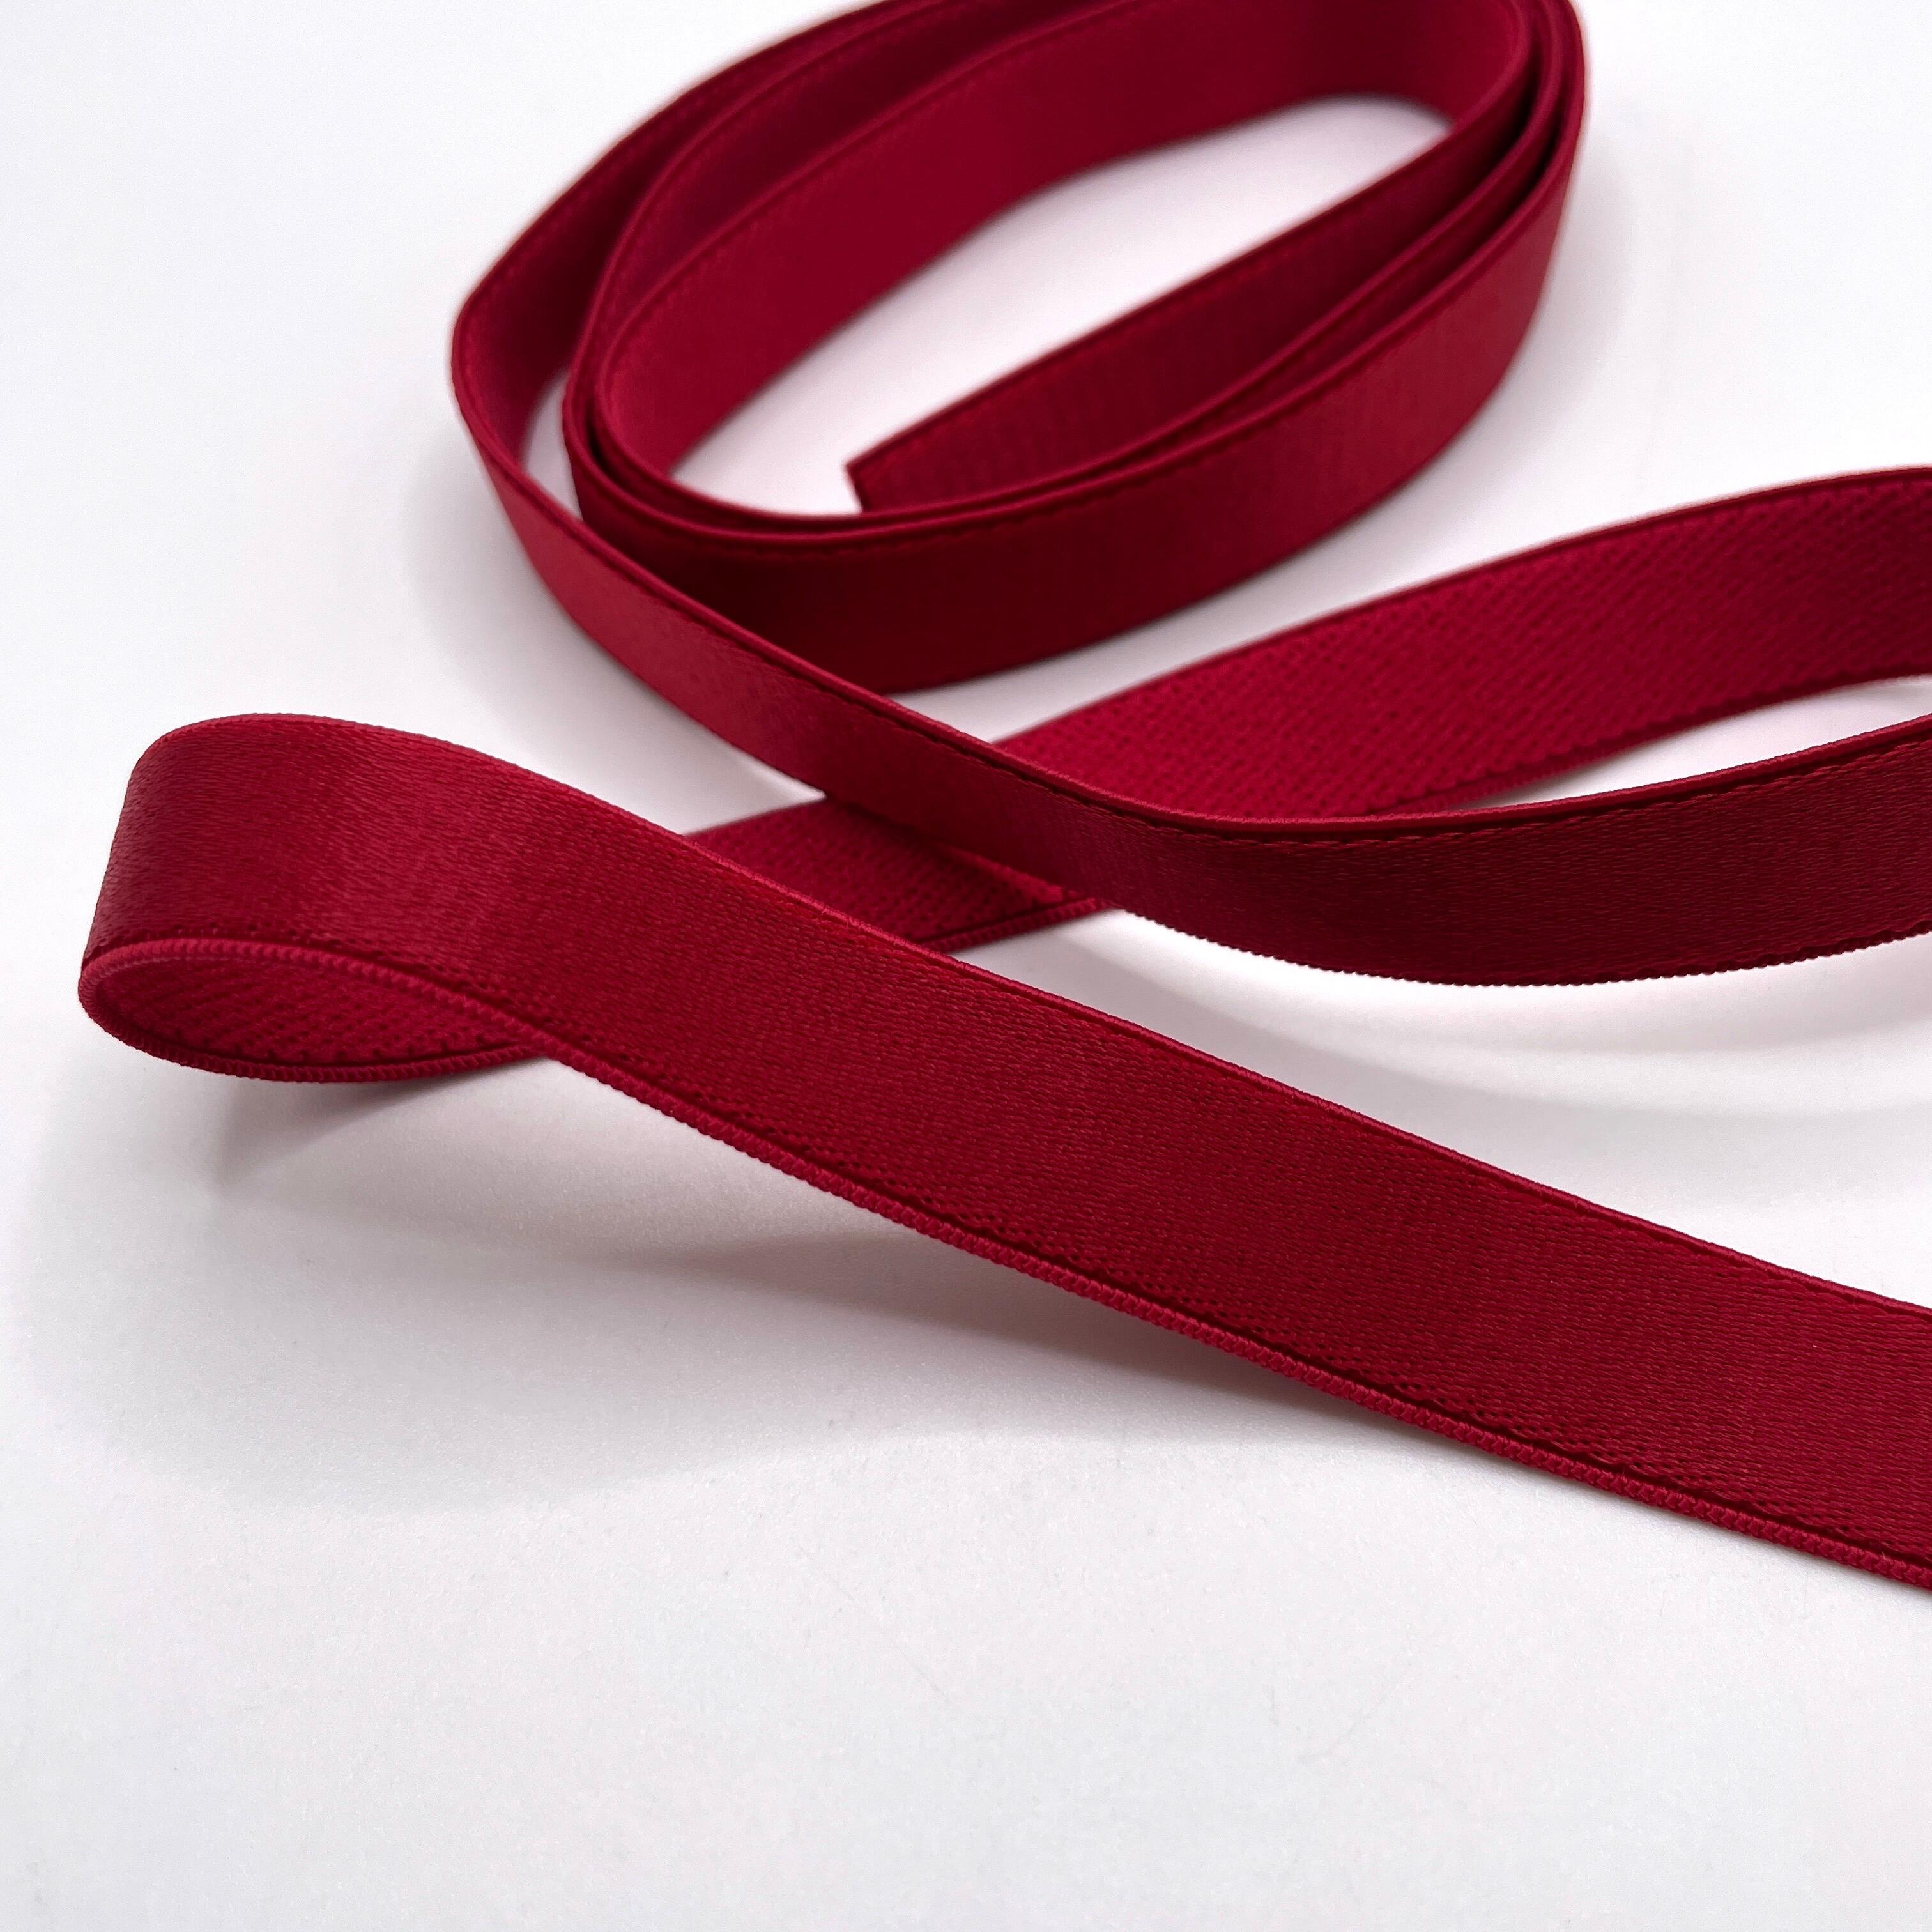 Bra Strap/Band & Suspender elastic - Soft & Stretchy (L32604) Shiny Face,  with soft back - 20mm WHITE